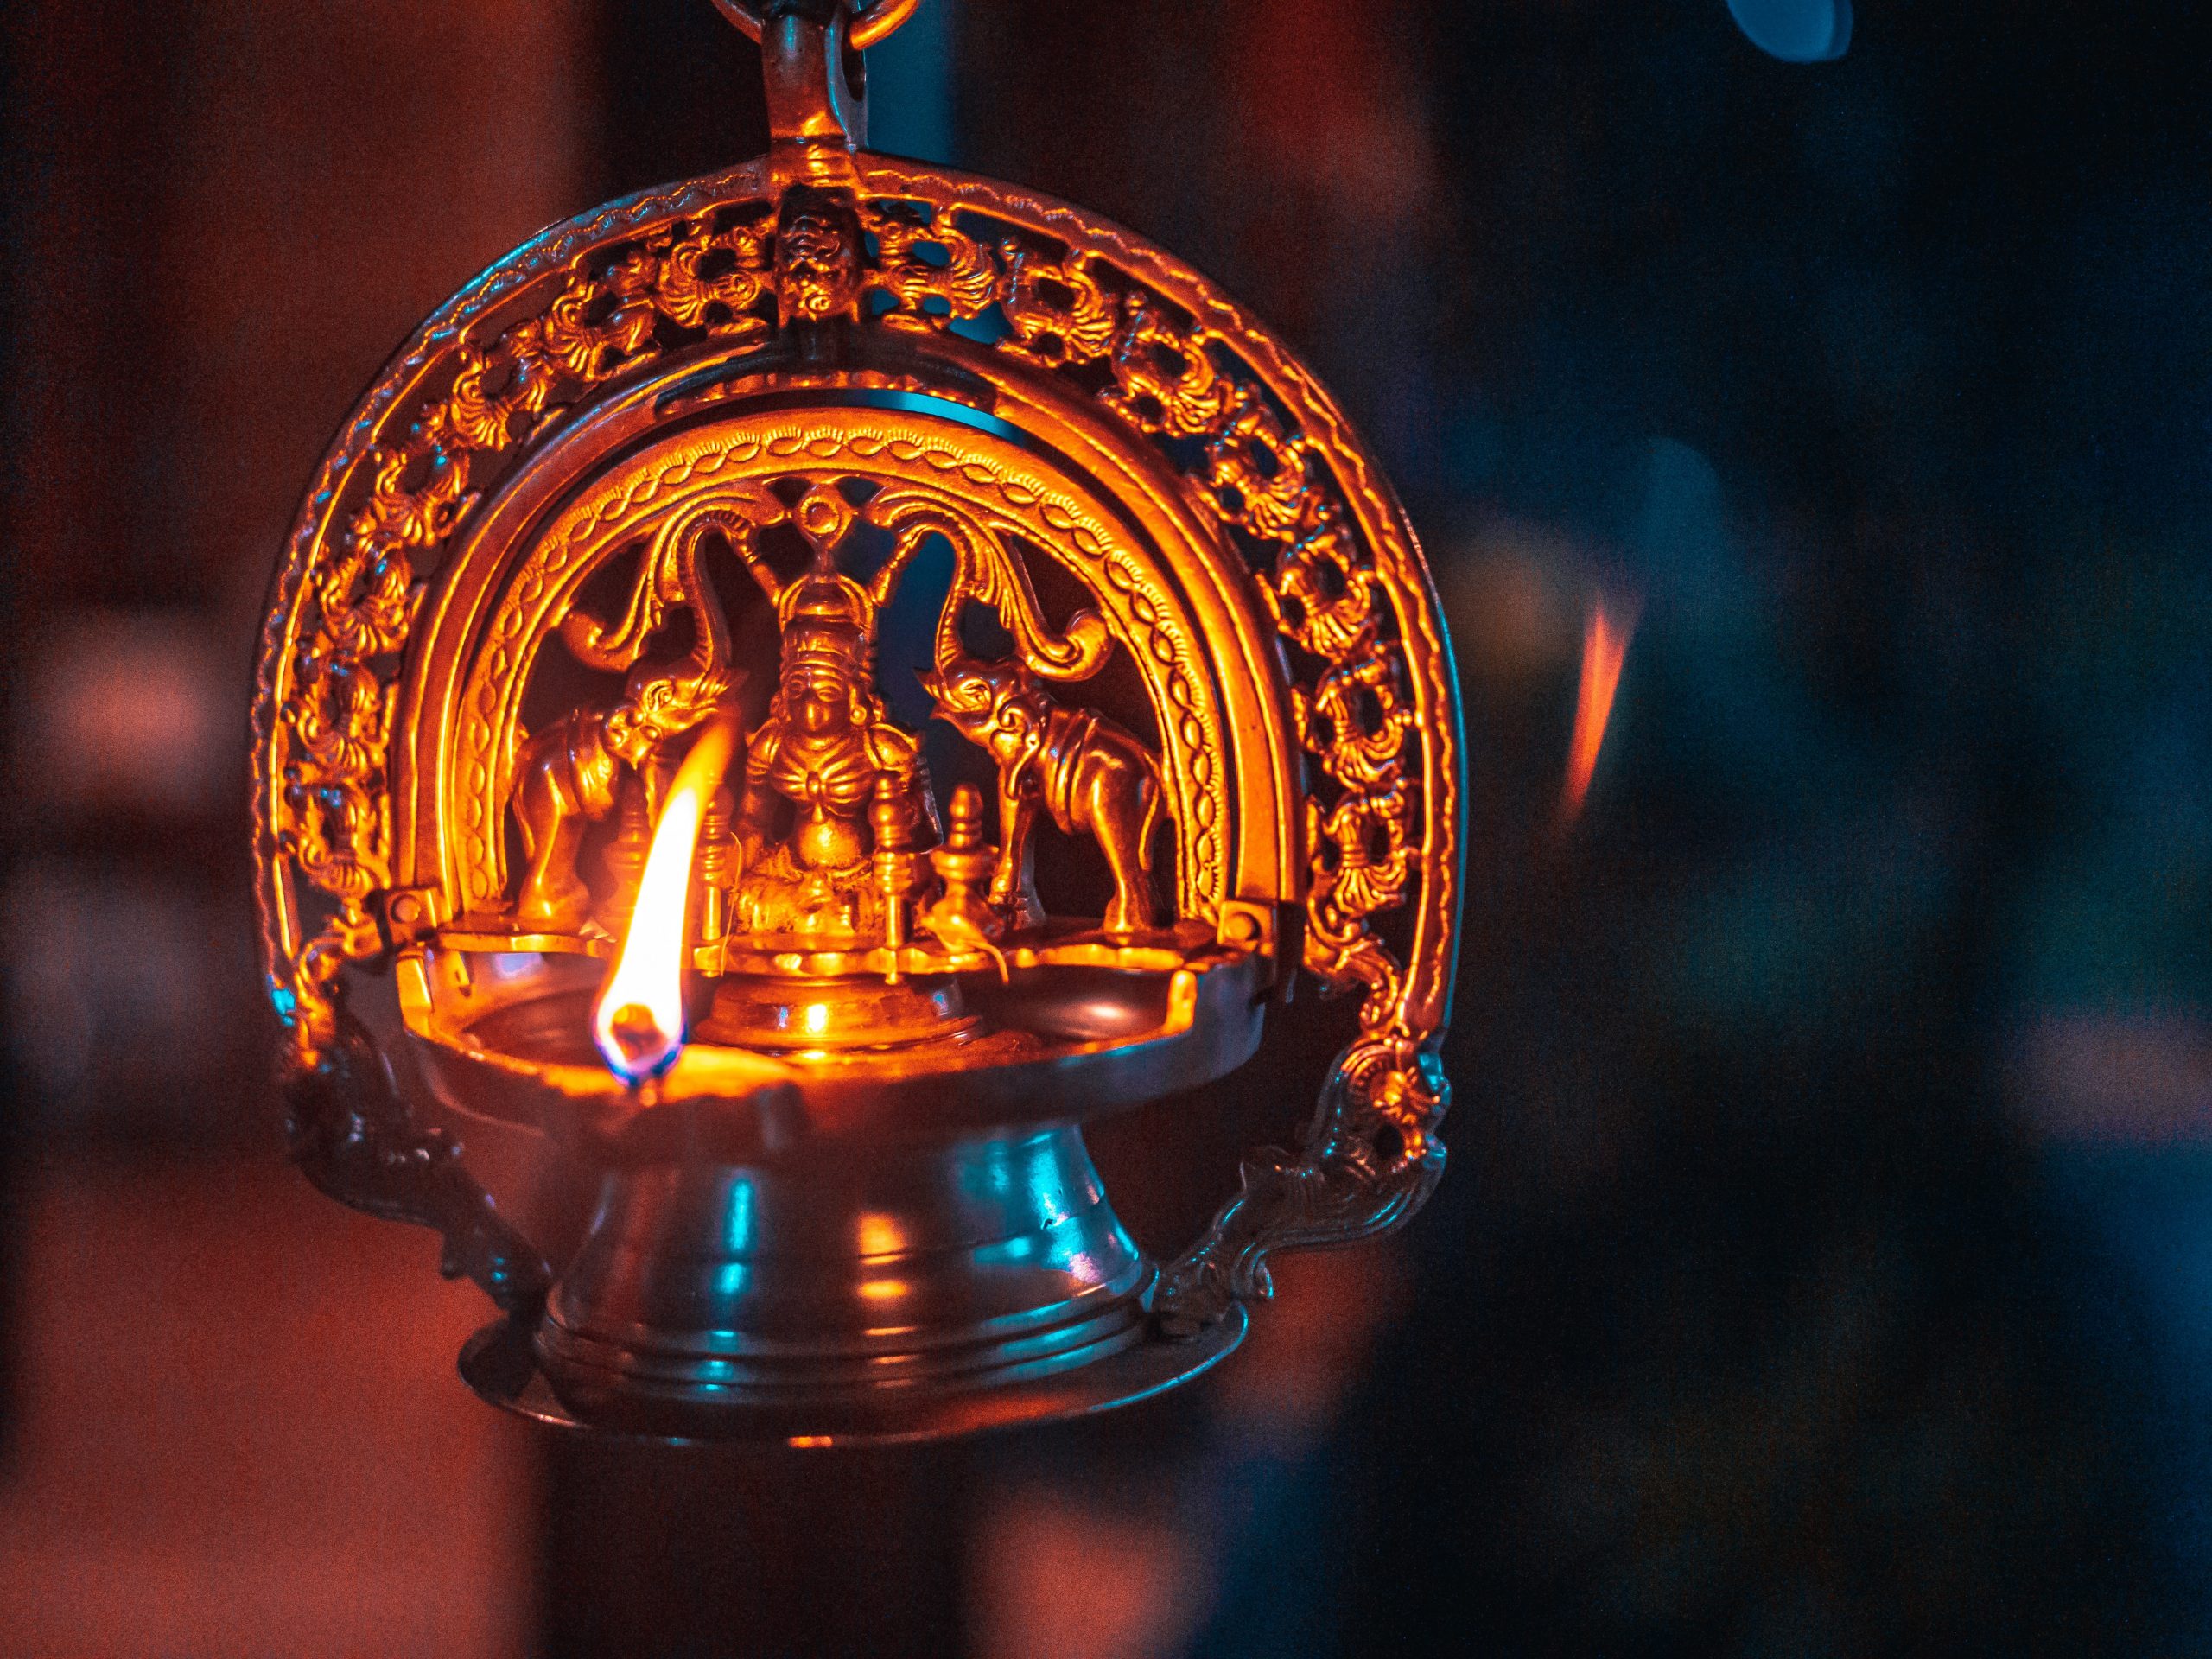 Thalai Deepavali is a unique Diwali celebration of which Indian state?